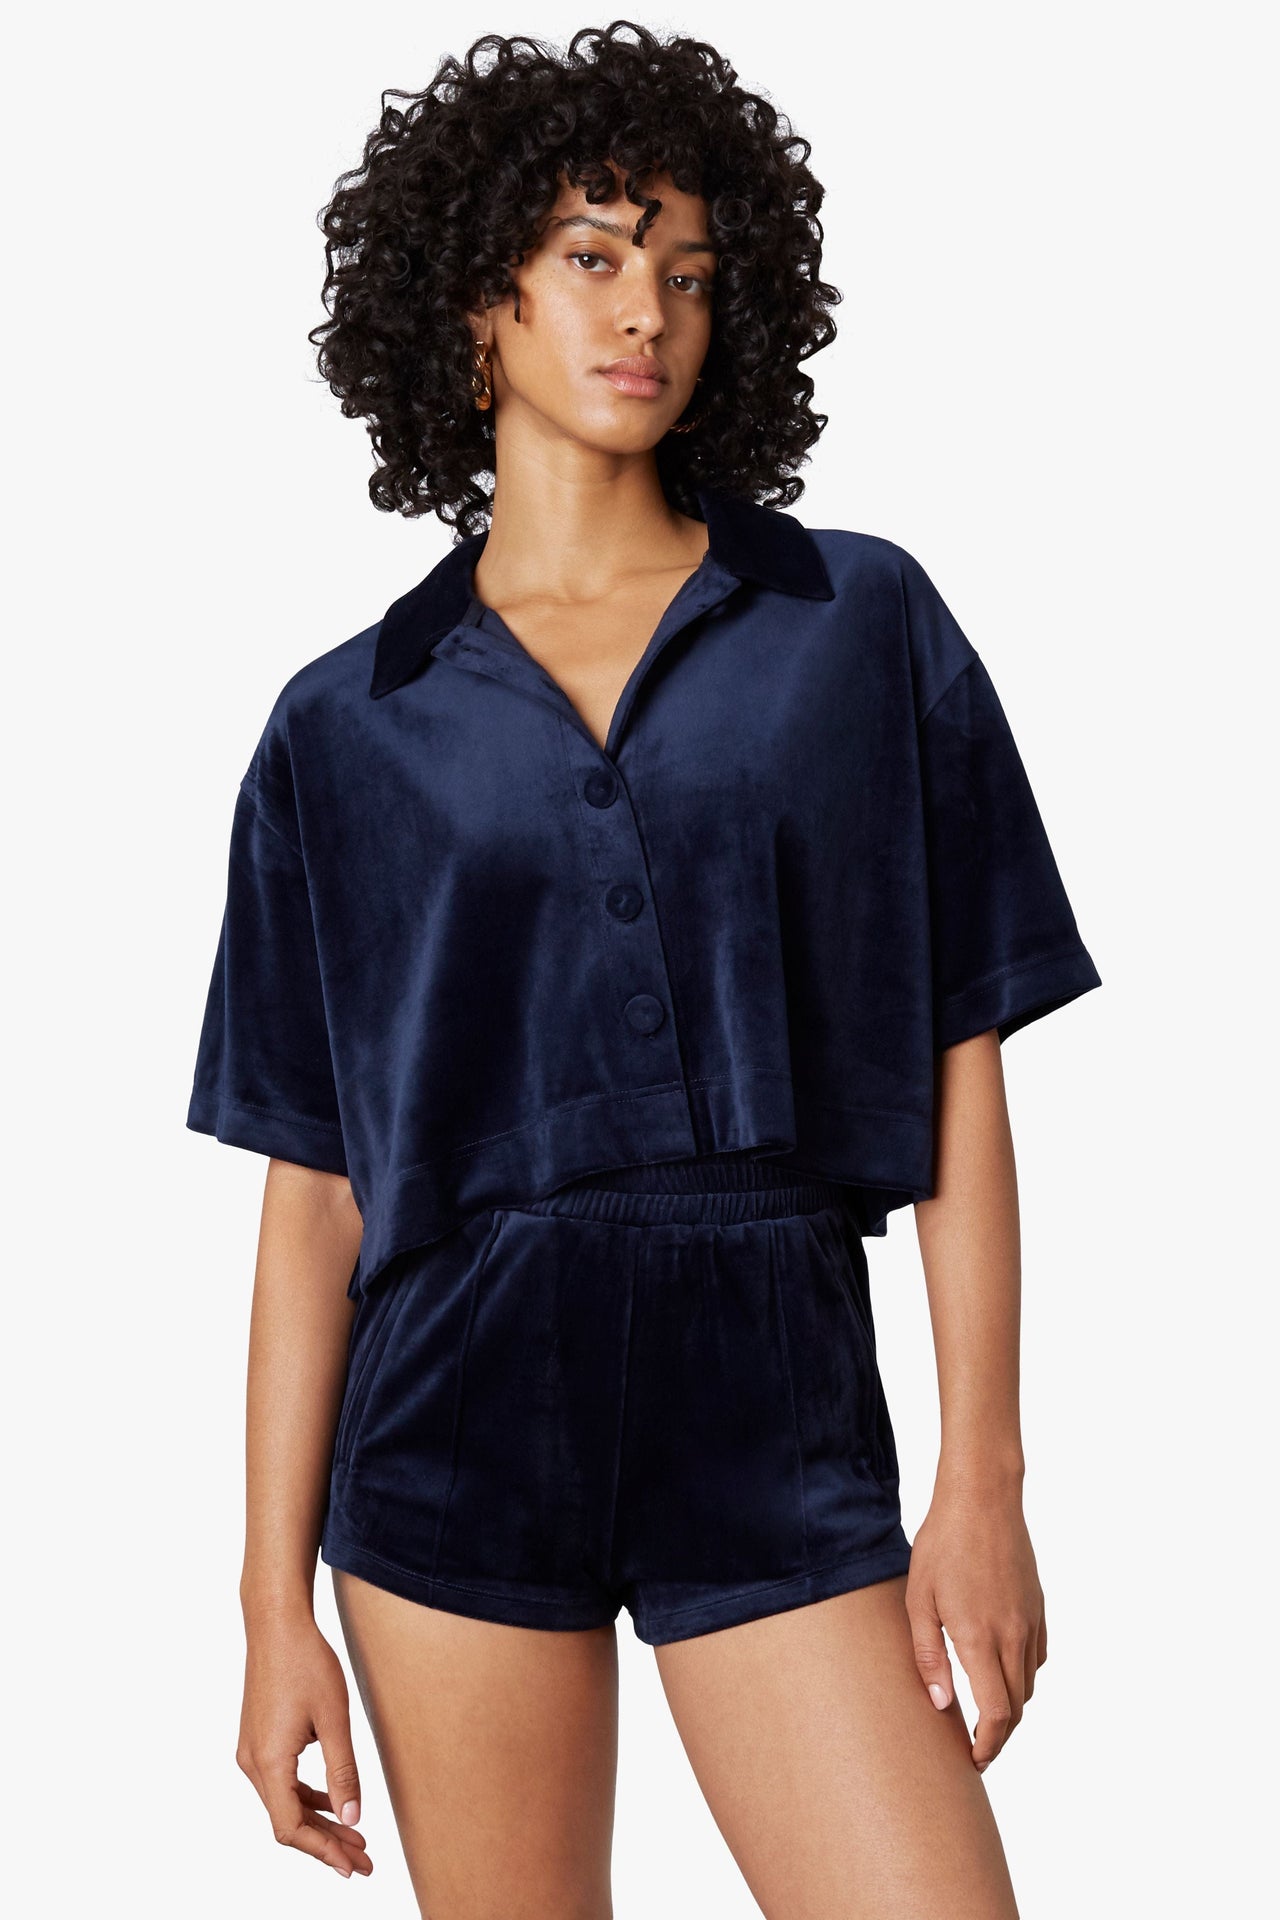 Velour Cropped Shirt Navy, Tee Casuals by NIA | LIT Boutique